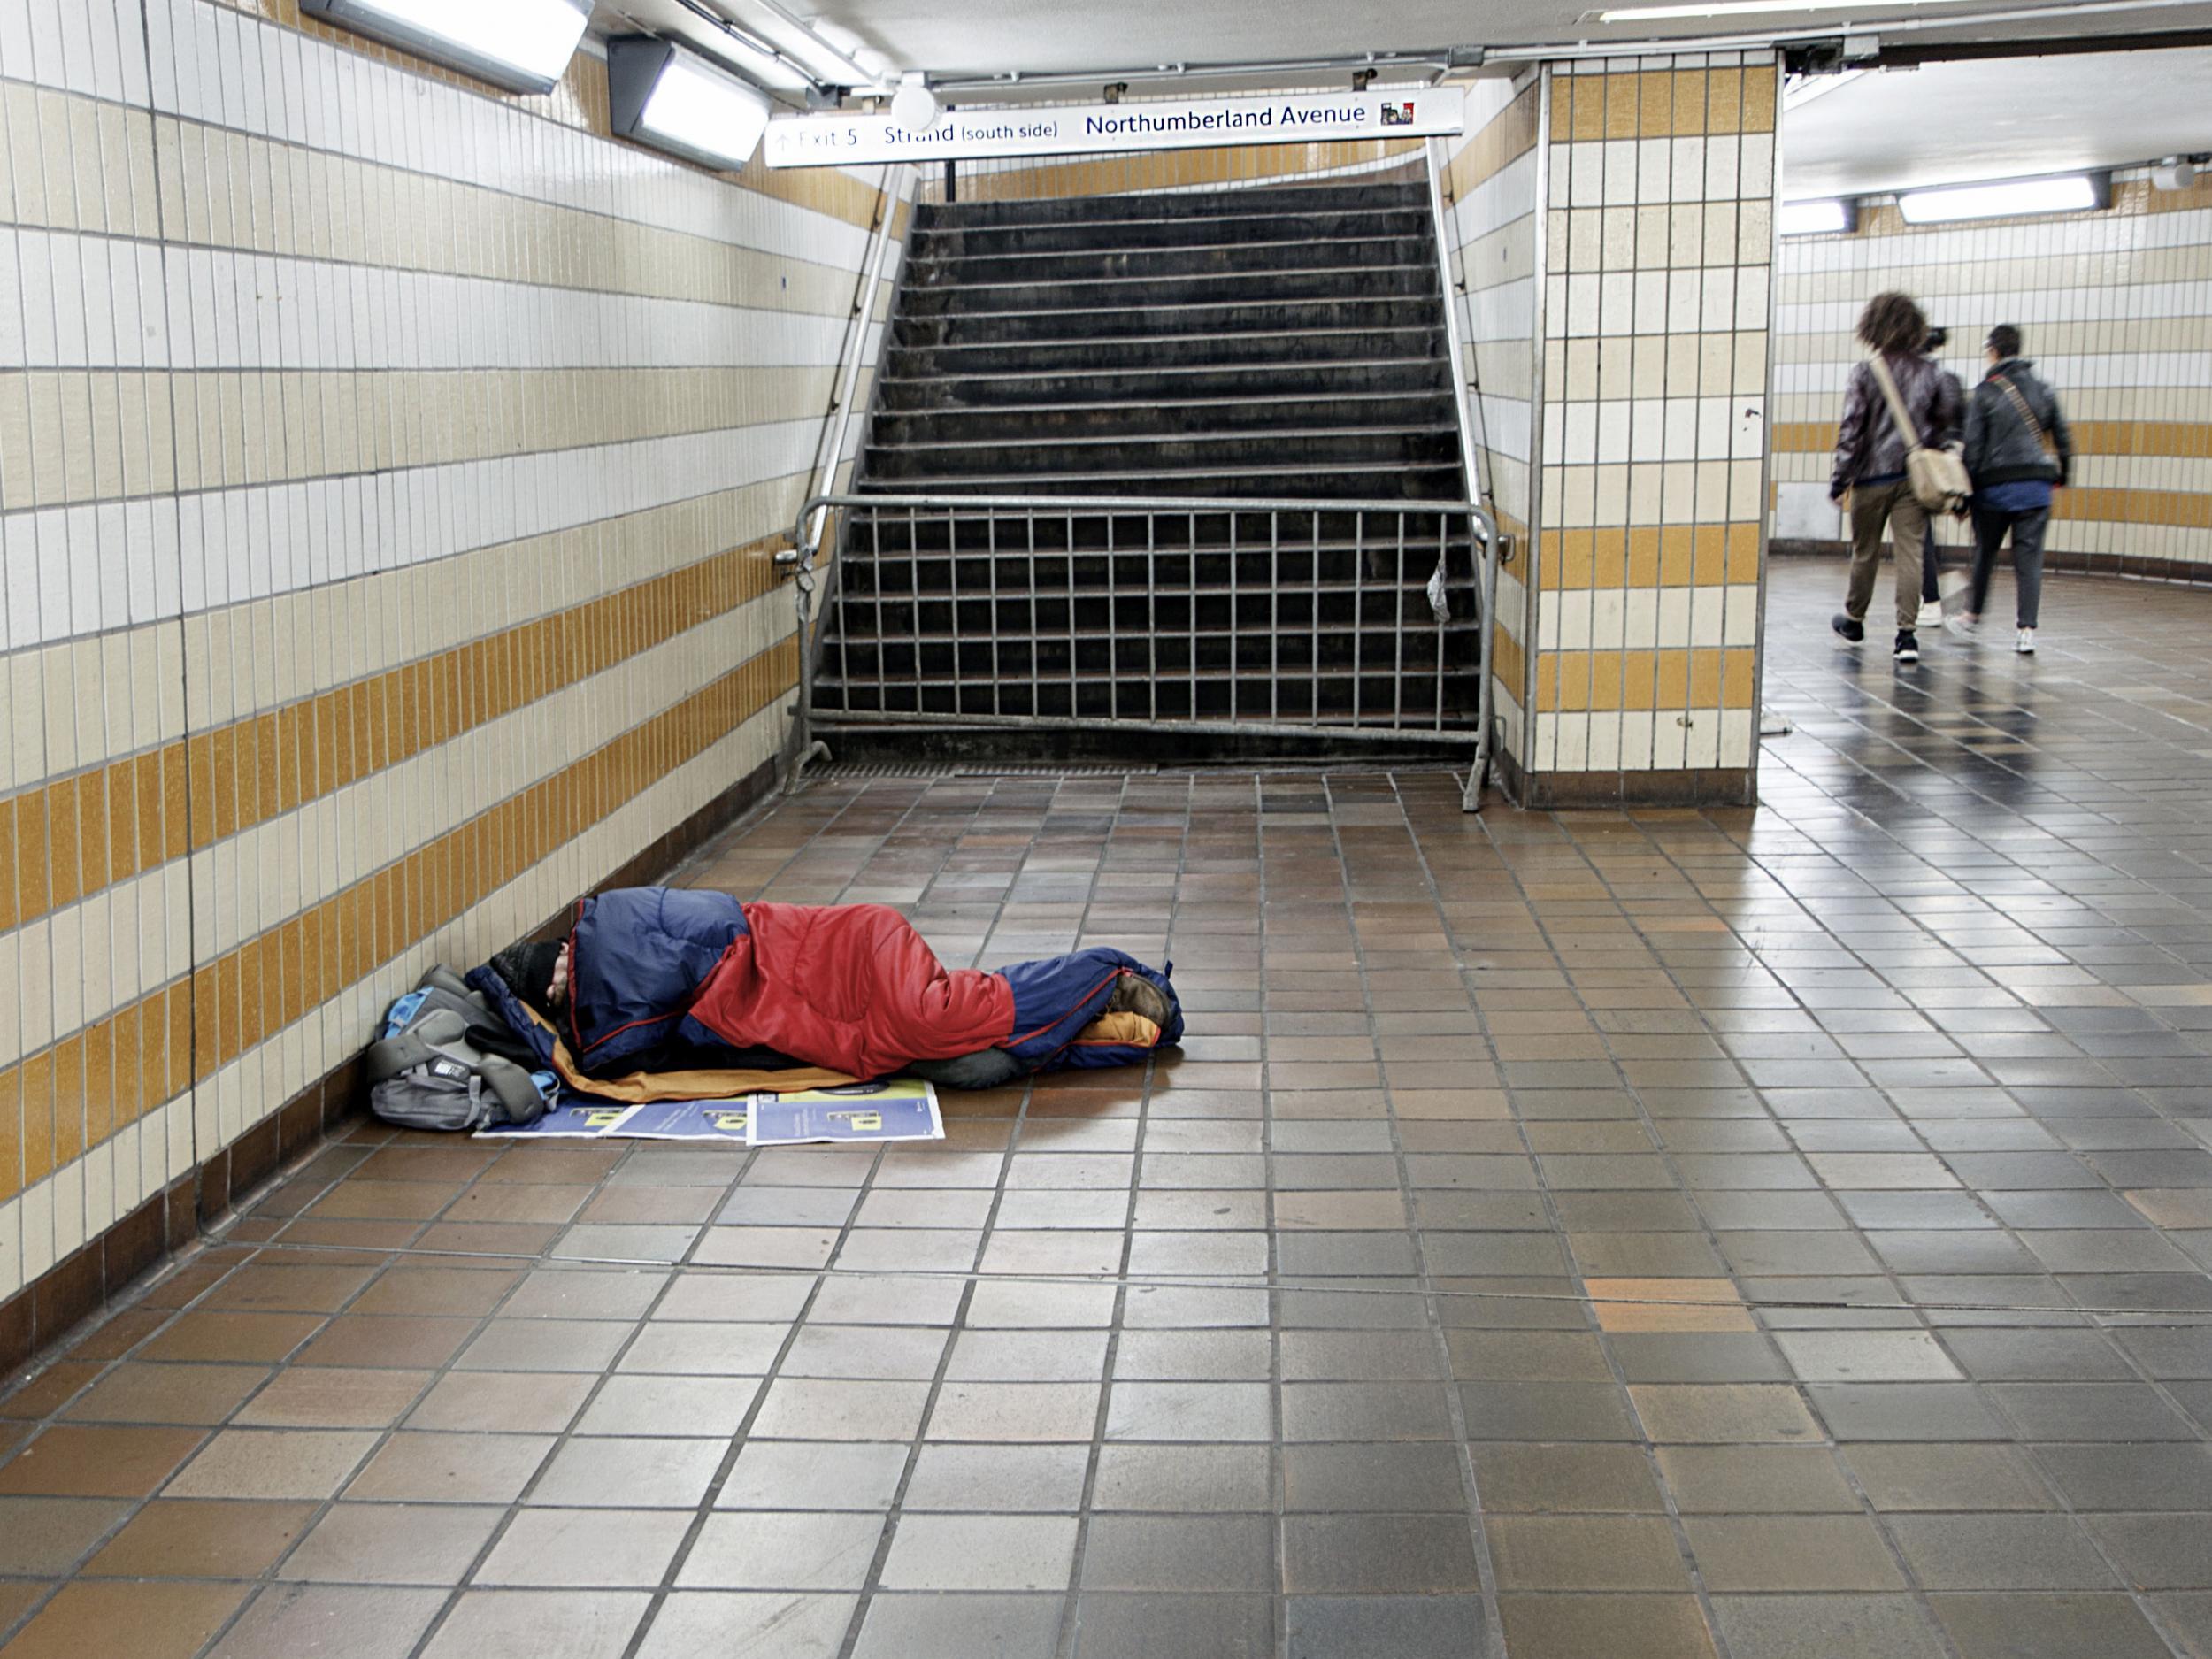 The number of people sleeping rough in England has more than doubled since 2010